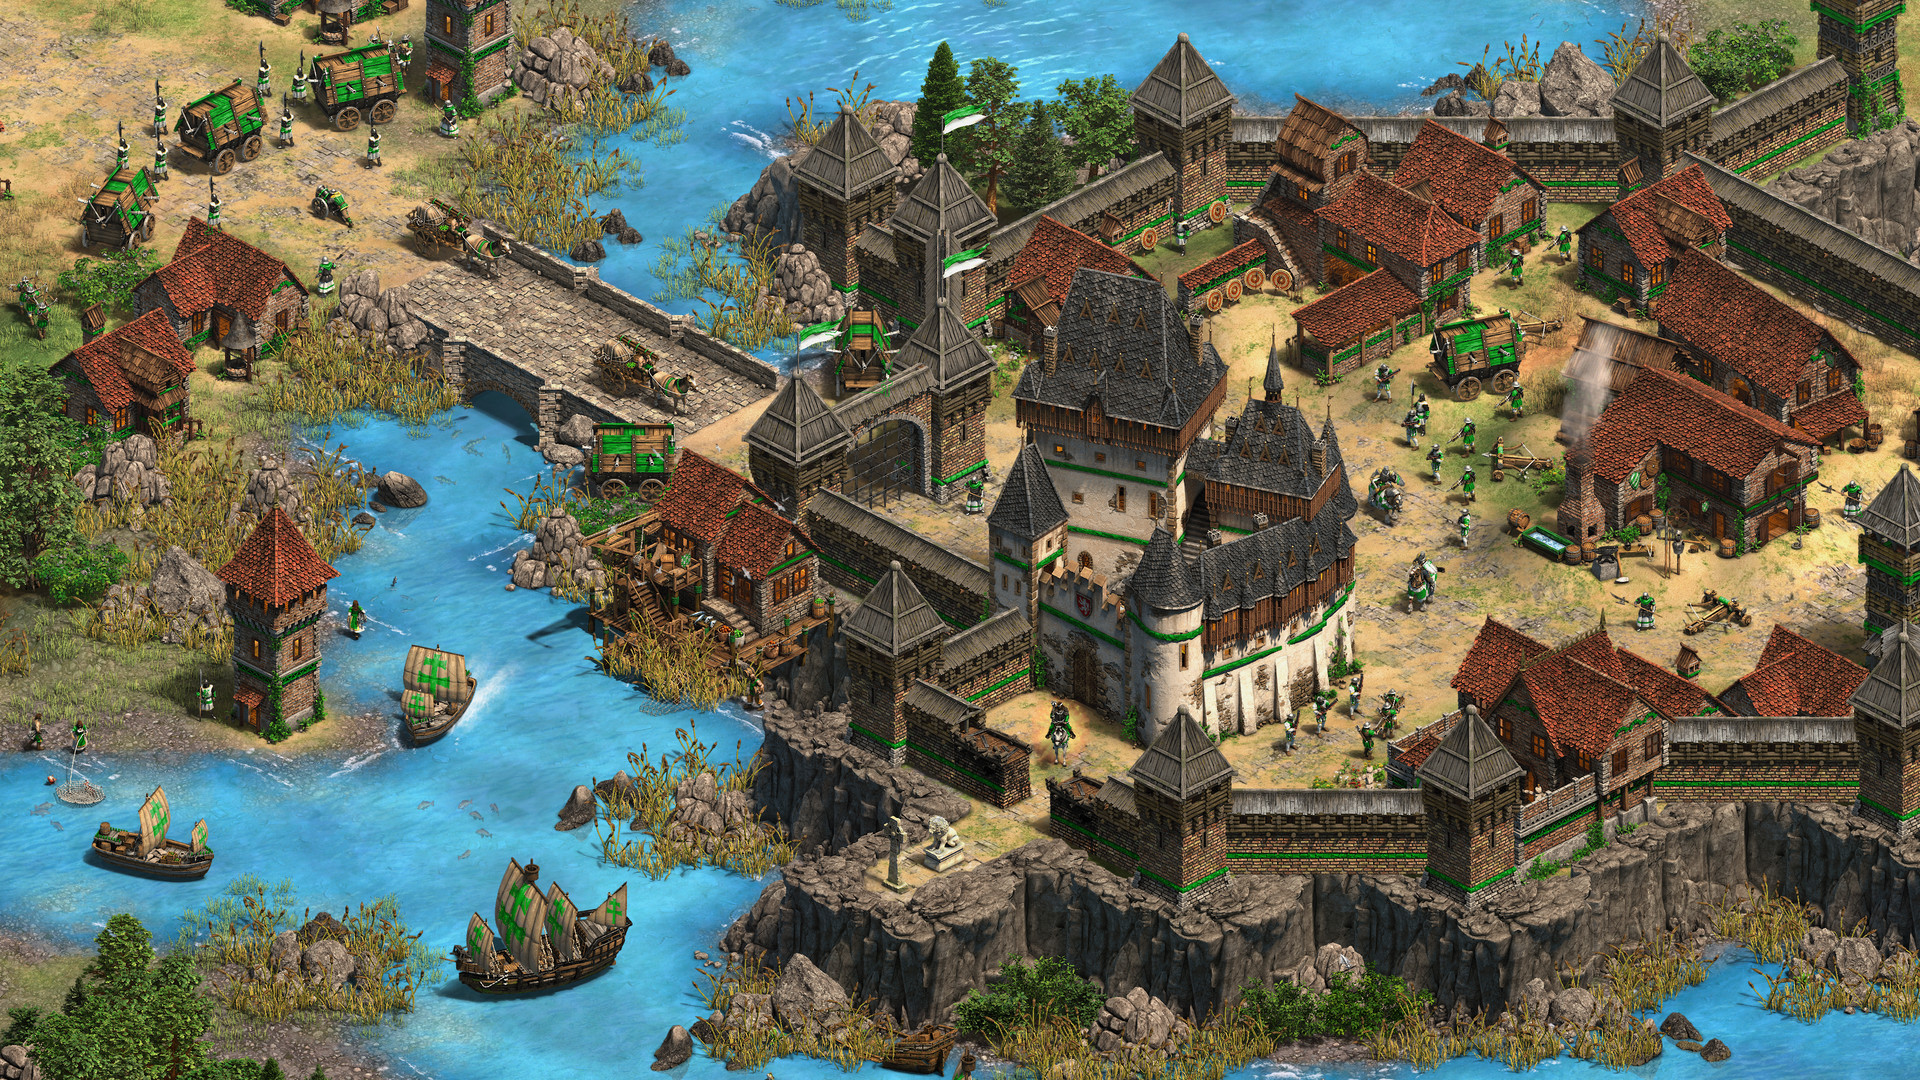 Age of Empires II: Definitive Edition - Dawn of the Dukes Featured Screenshot #1